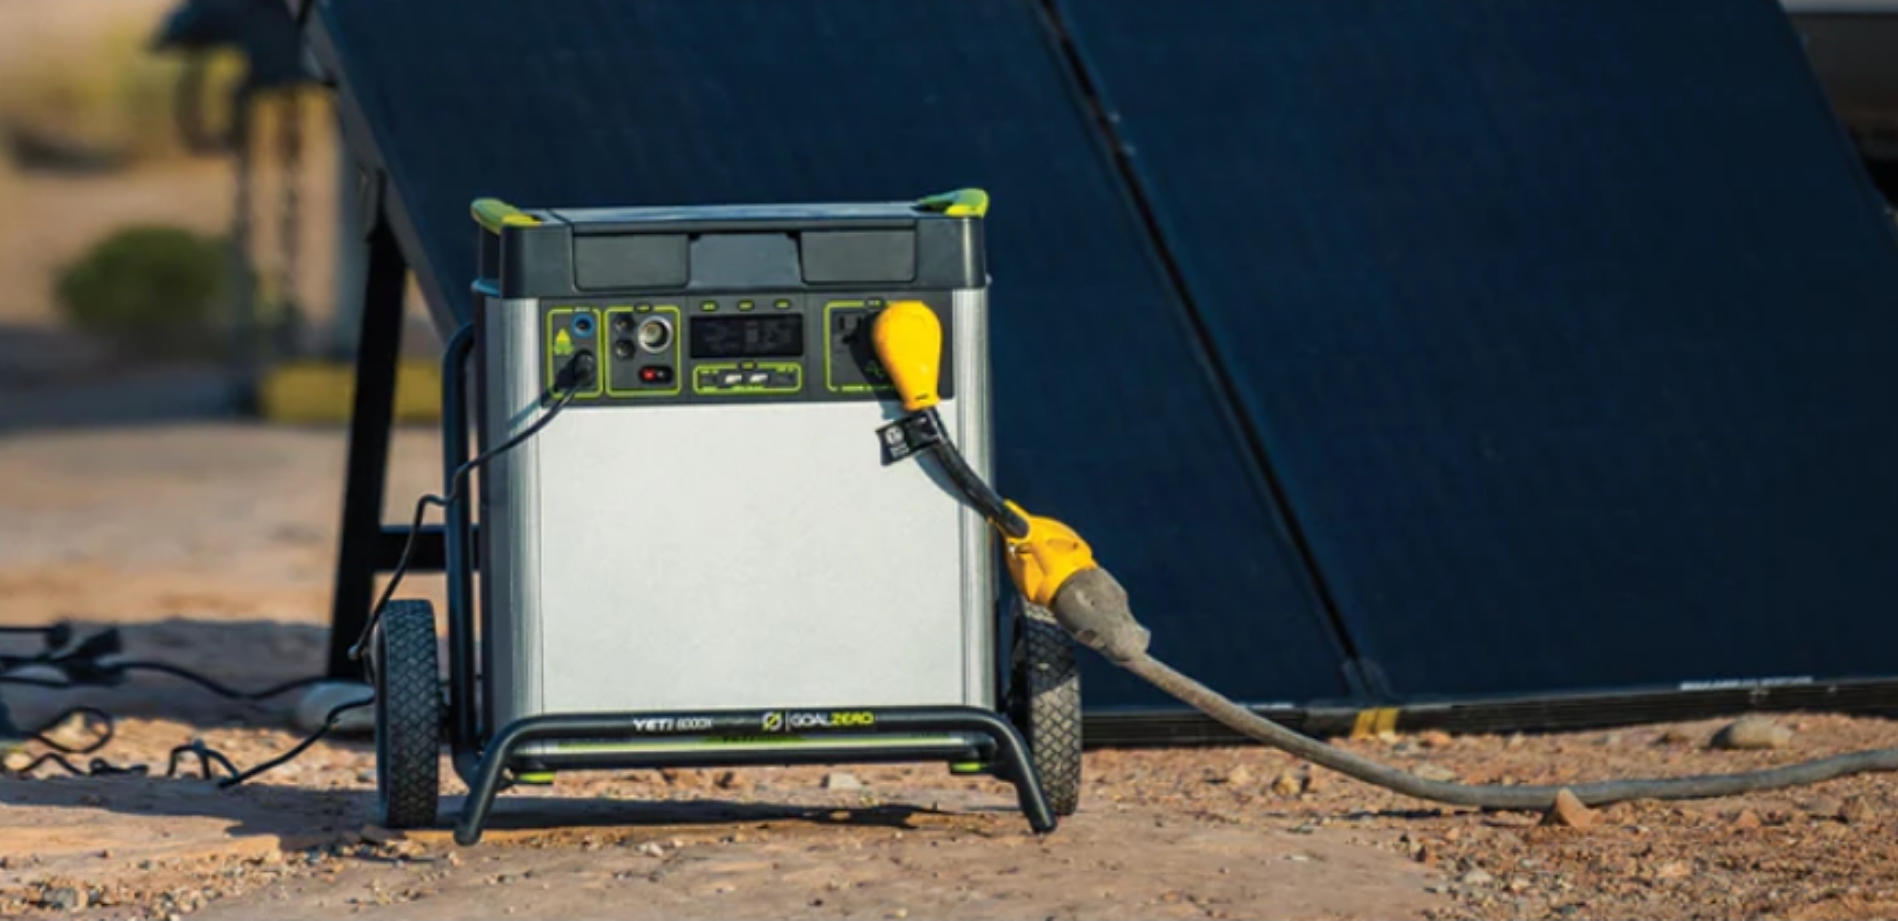 Choosing The Right Generator For You